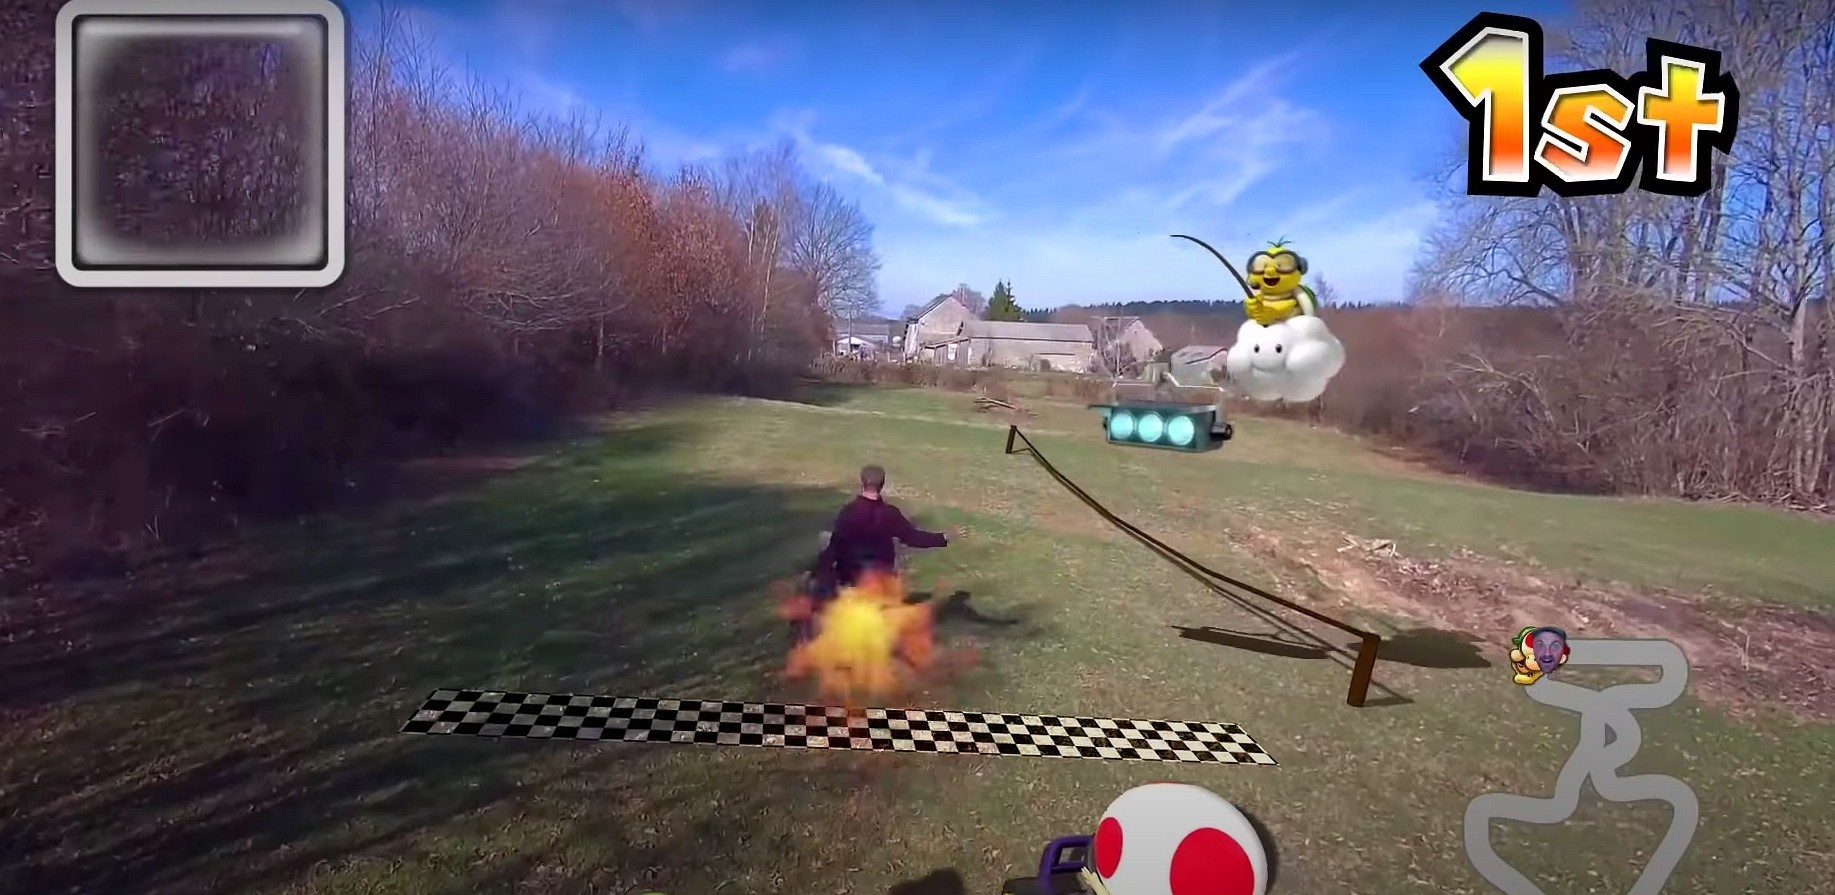 Guy Plays Real-Life Mario Kart With a Lawn Mower and a Skydio